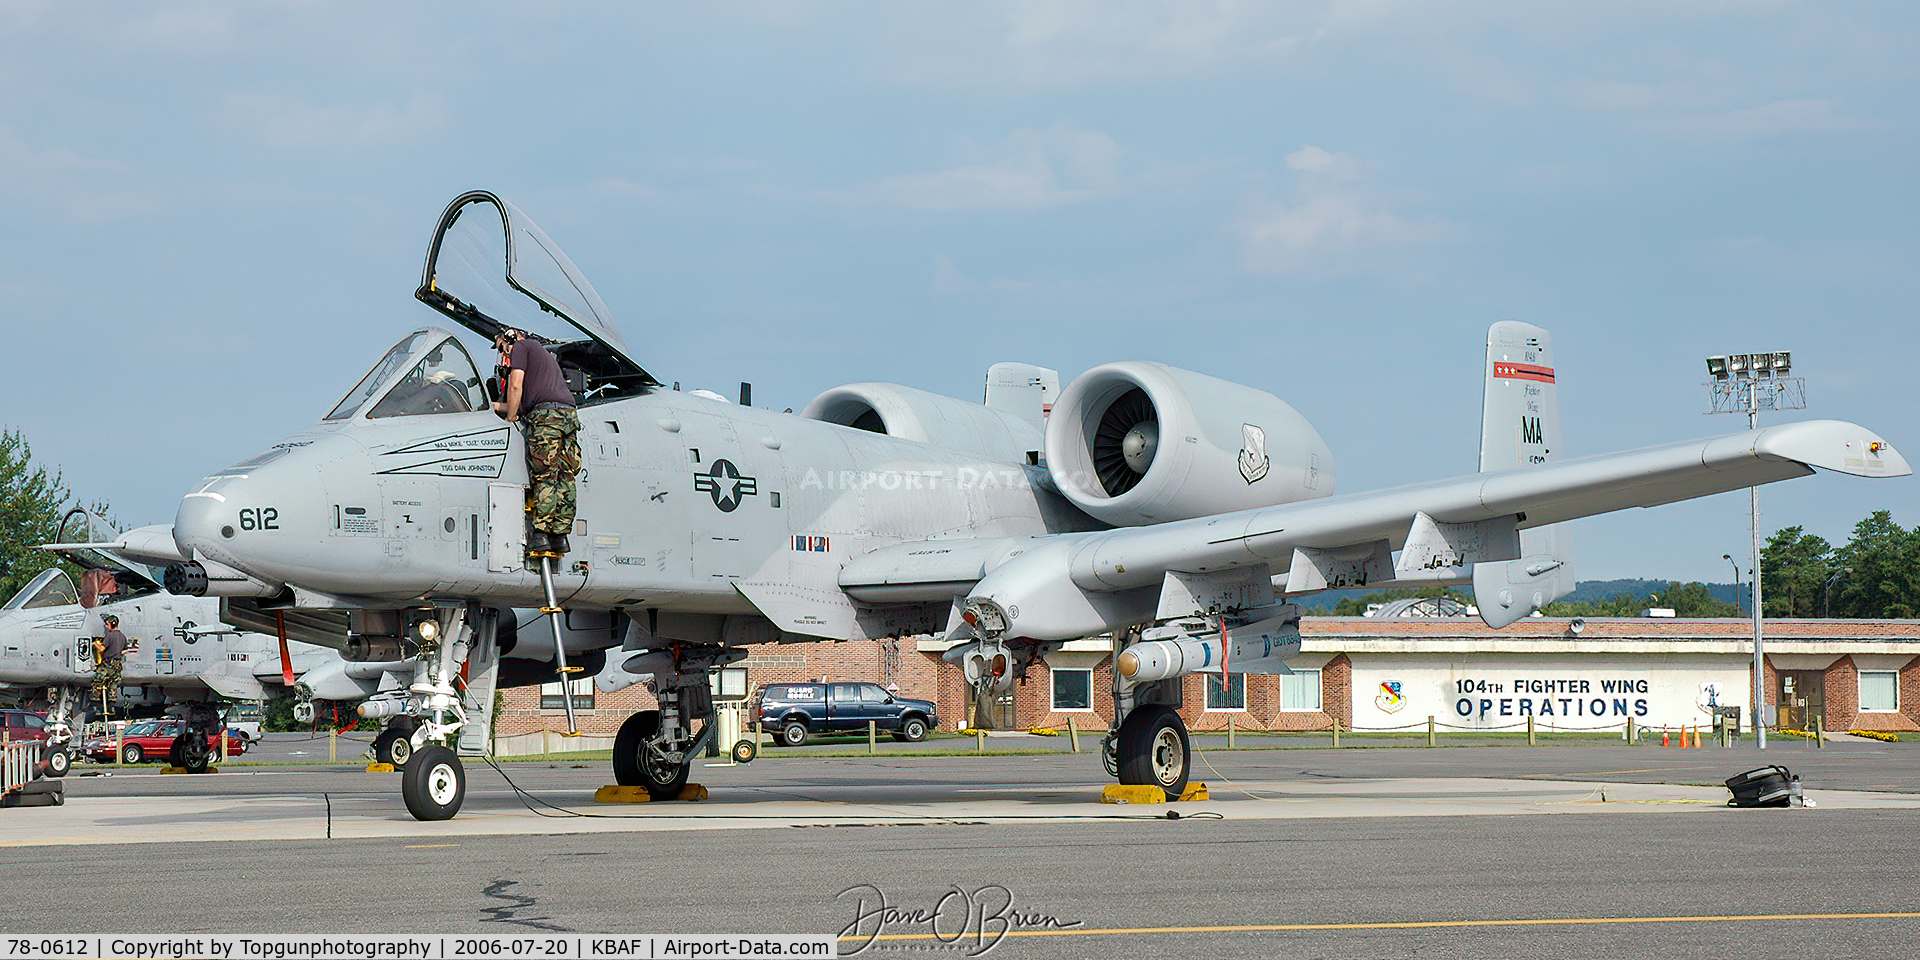 78-0612, 1978 Fairchild Republic A-10A Thunderbolt II C/N A10-0232, Prepping the jets prior to morning launch